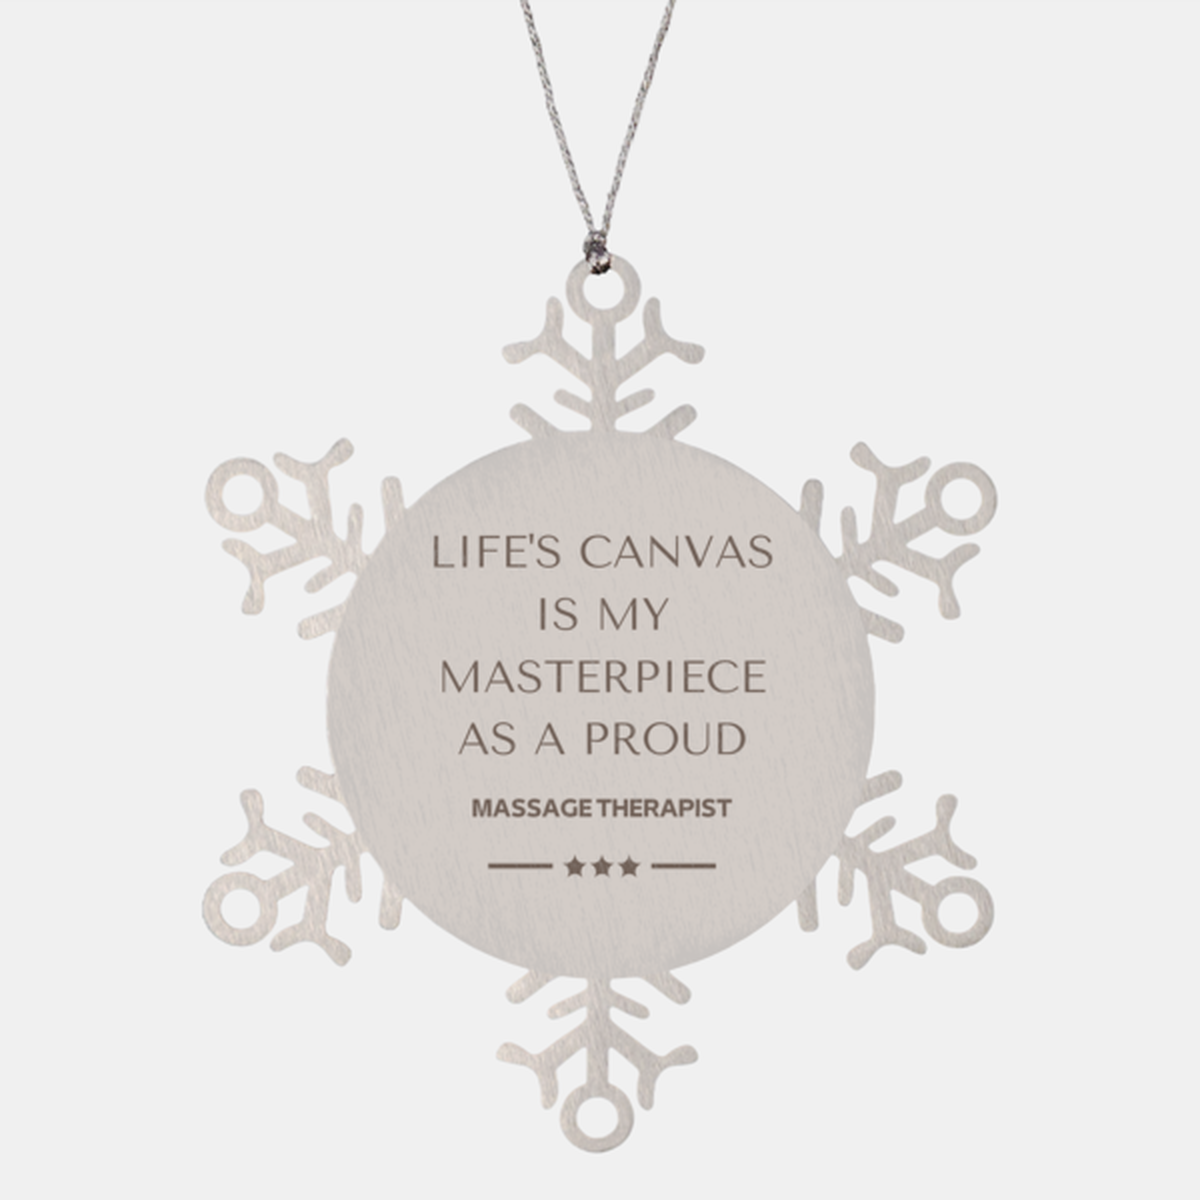 Proud Massage Therapist Gifts, Life's canvas is my masterpiece, Epic Birthday Christmas Unique Snowflake Ornament For Massage Therapist, Coworkers, Men, Women, Friends